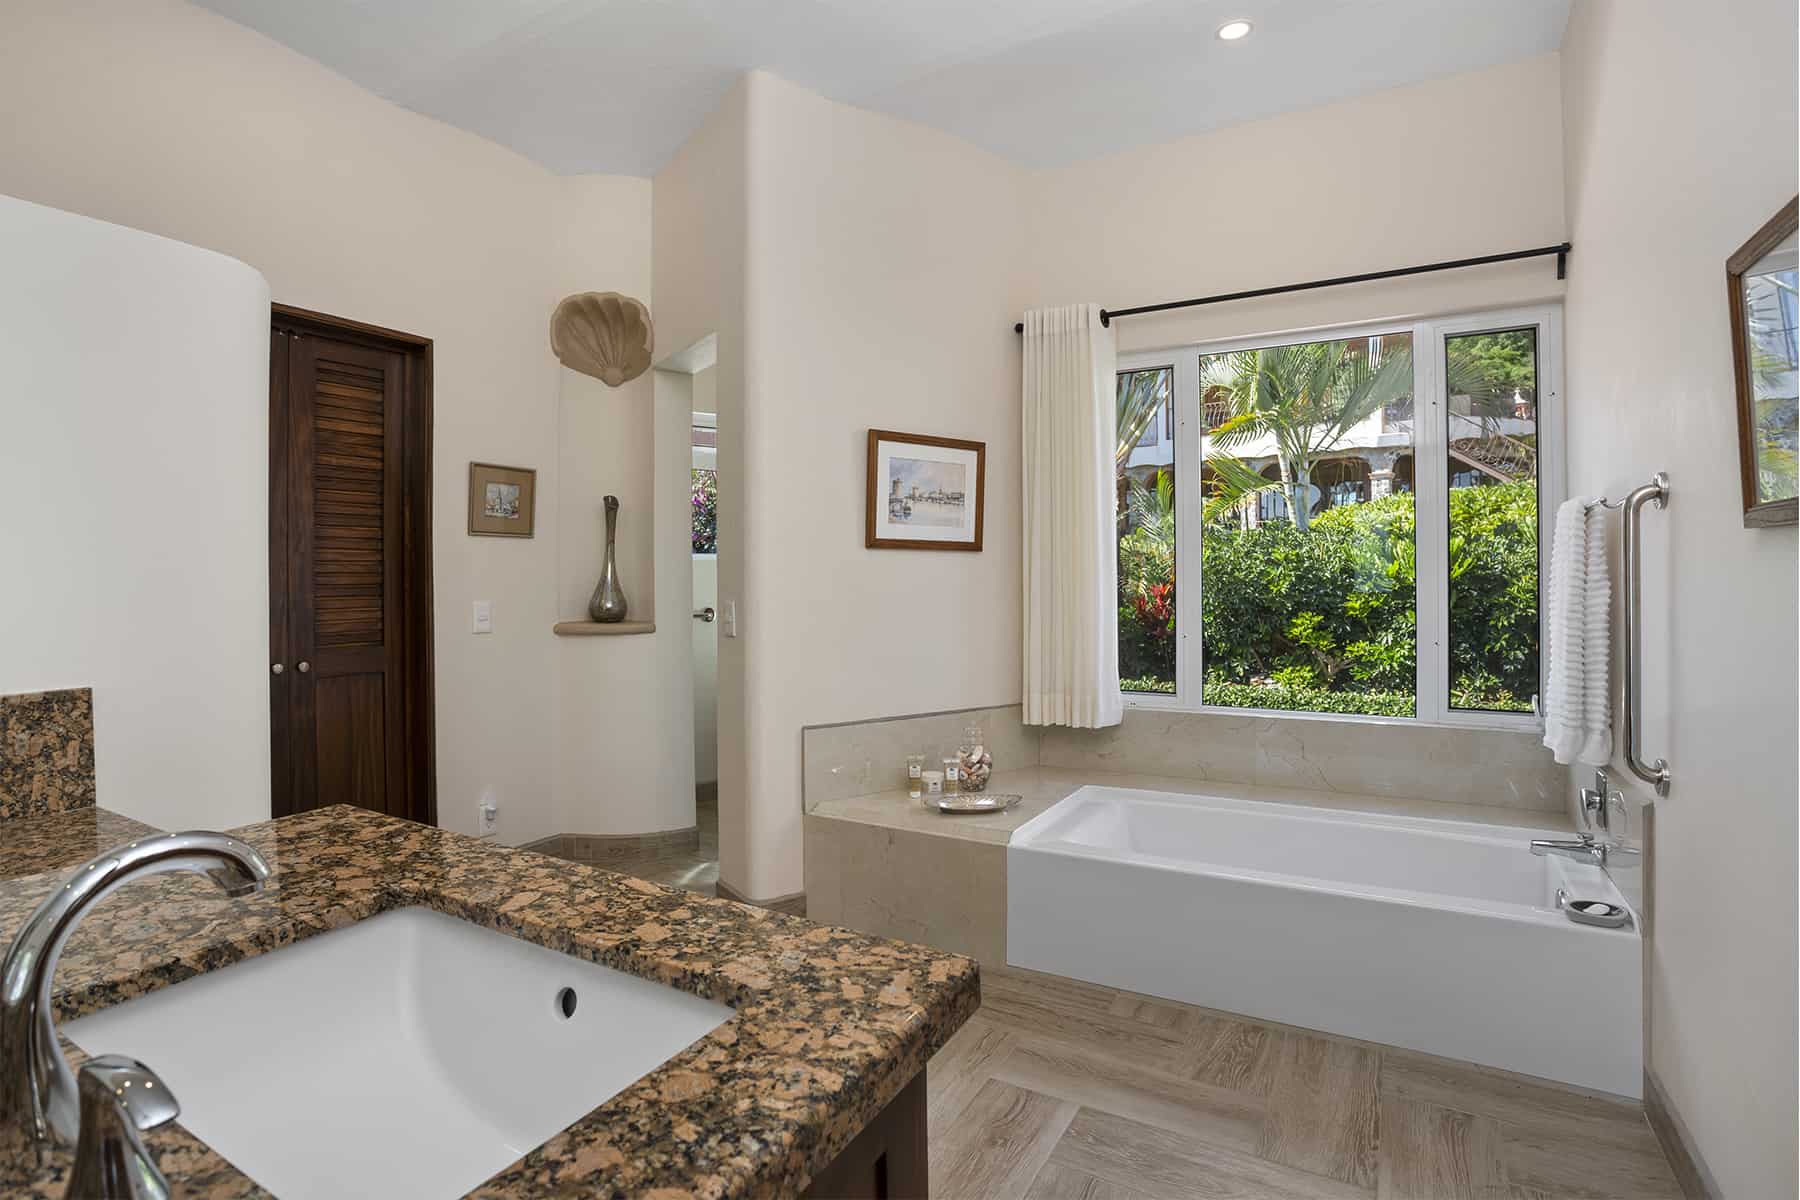 09 Master Bath Features a Soaking Tub with Mountain Views